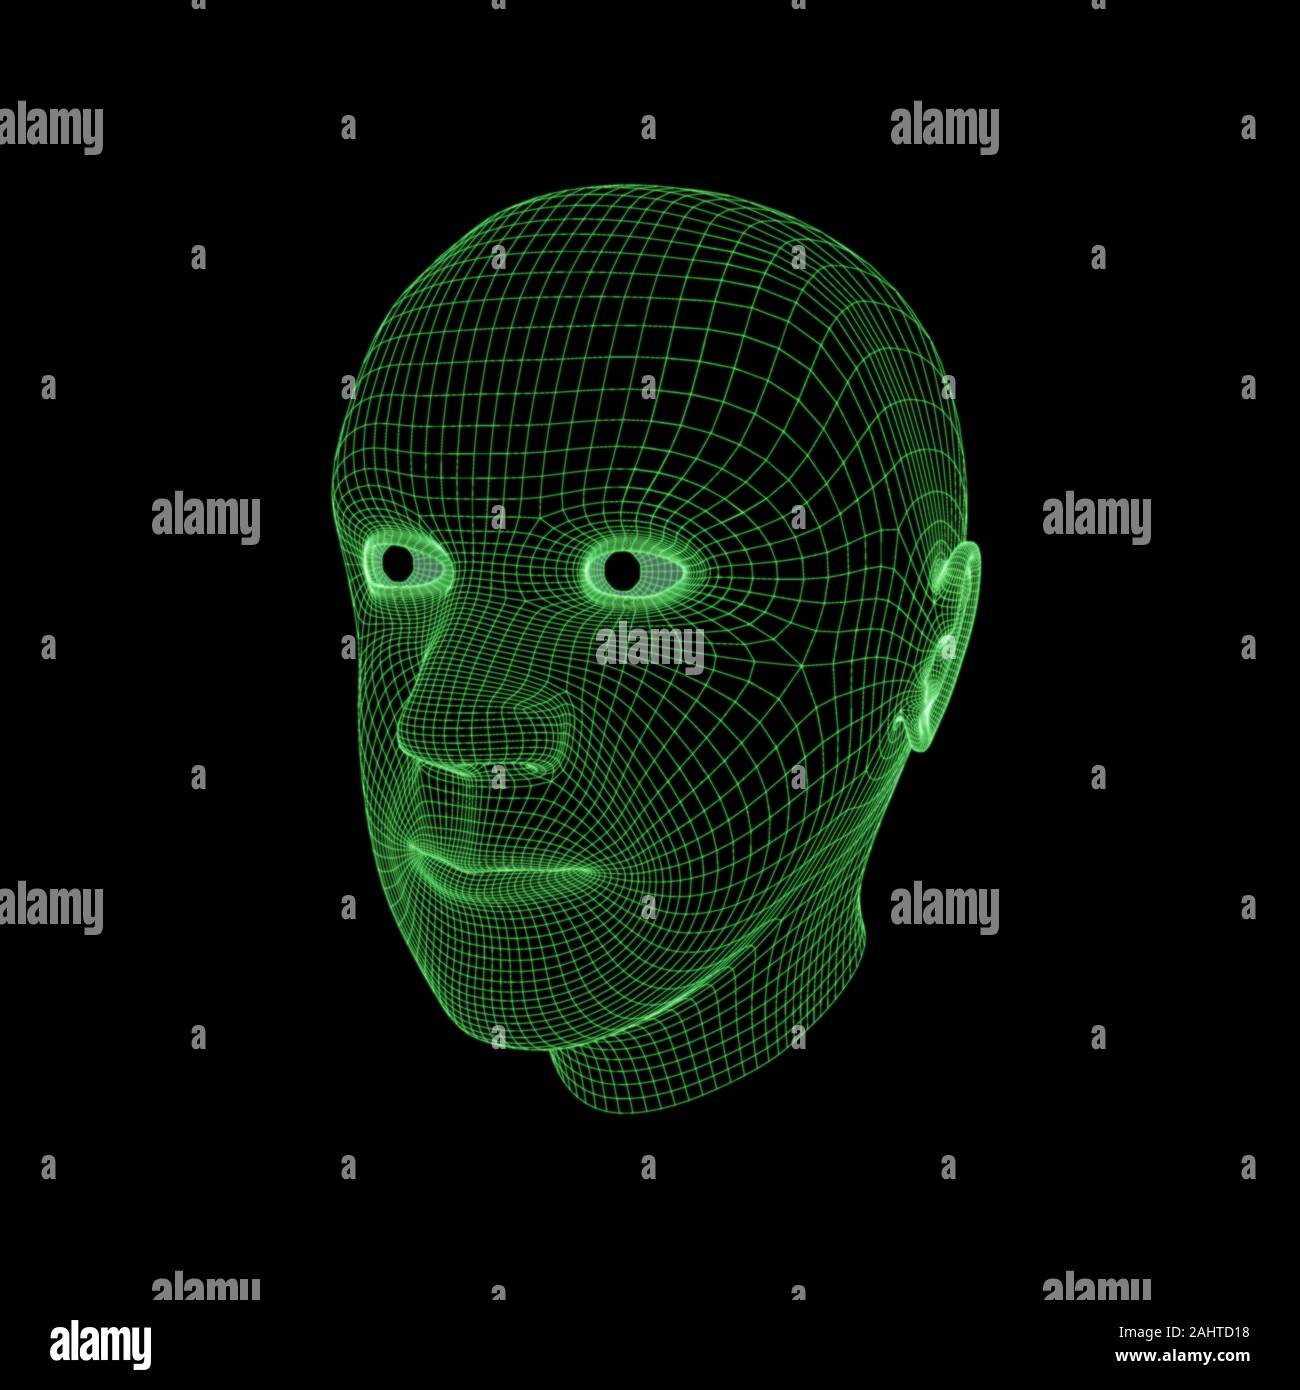 Green wire frame rendering of a man's head against a black background Stock Photo